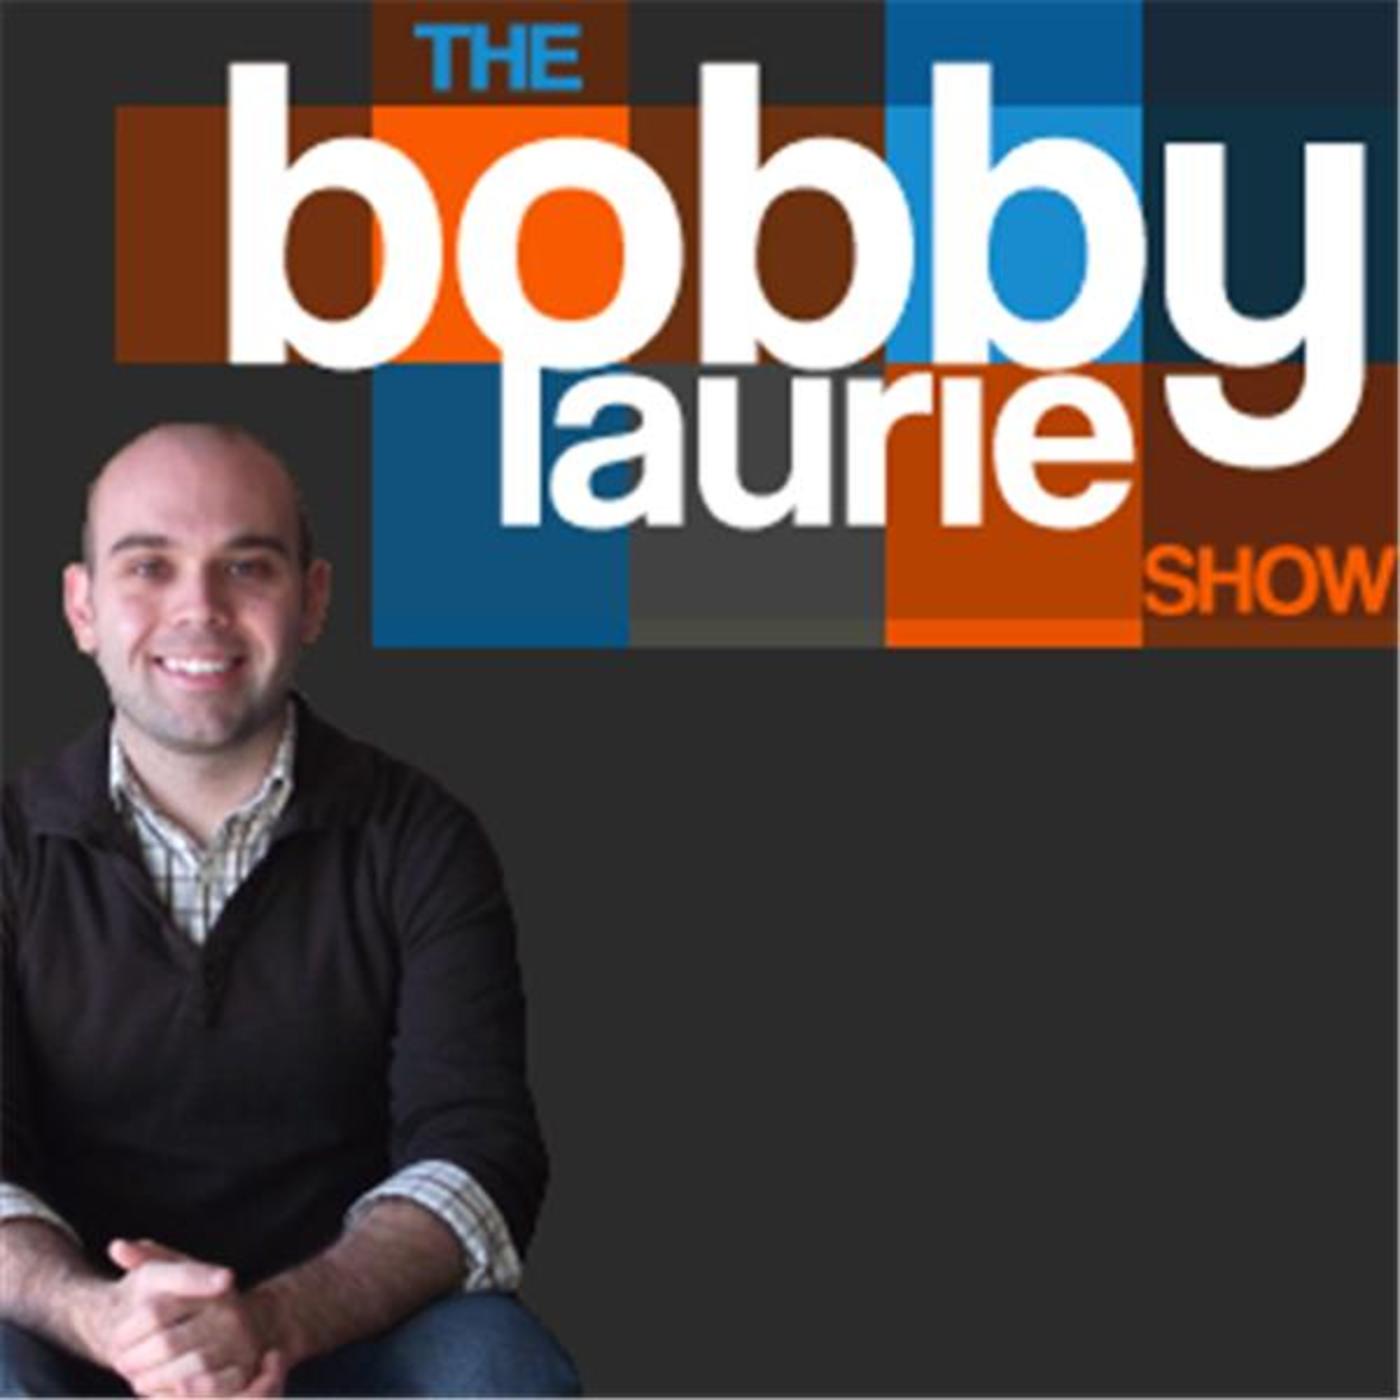 The Bobby Laurie Show: Confrontations in the Aisle